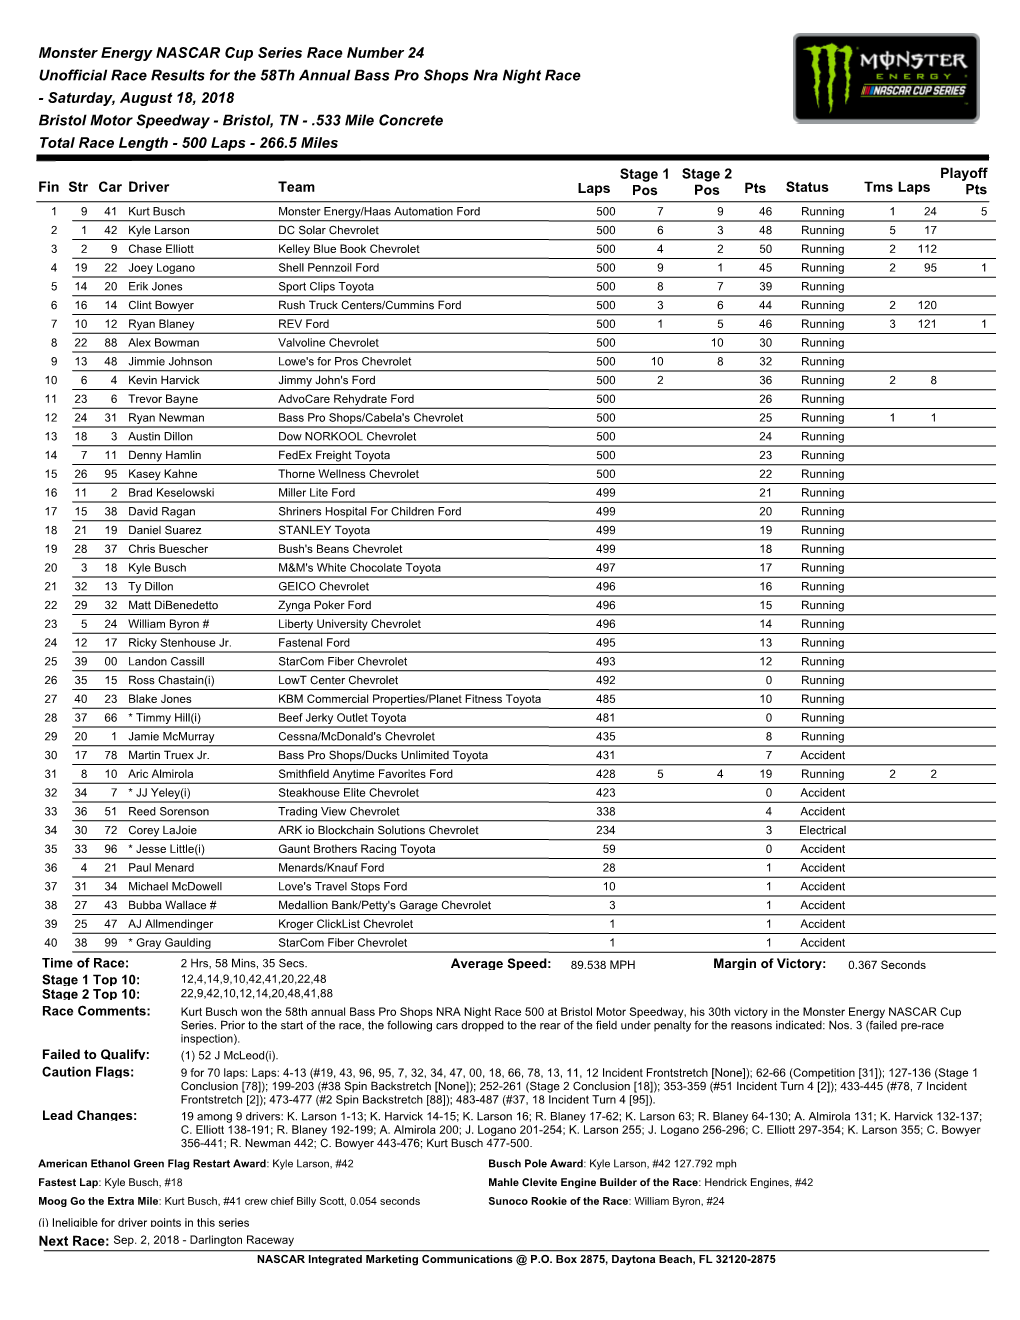 Monster Energy NASCAR Cup Series Race Number 24 Unofficial